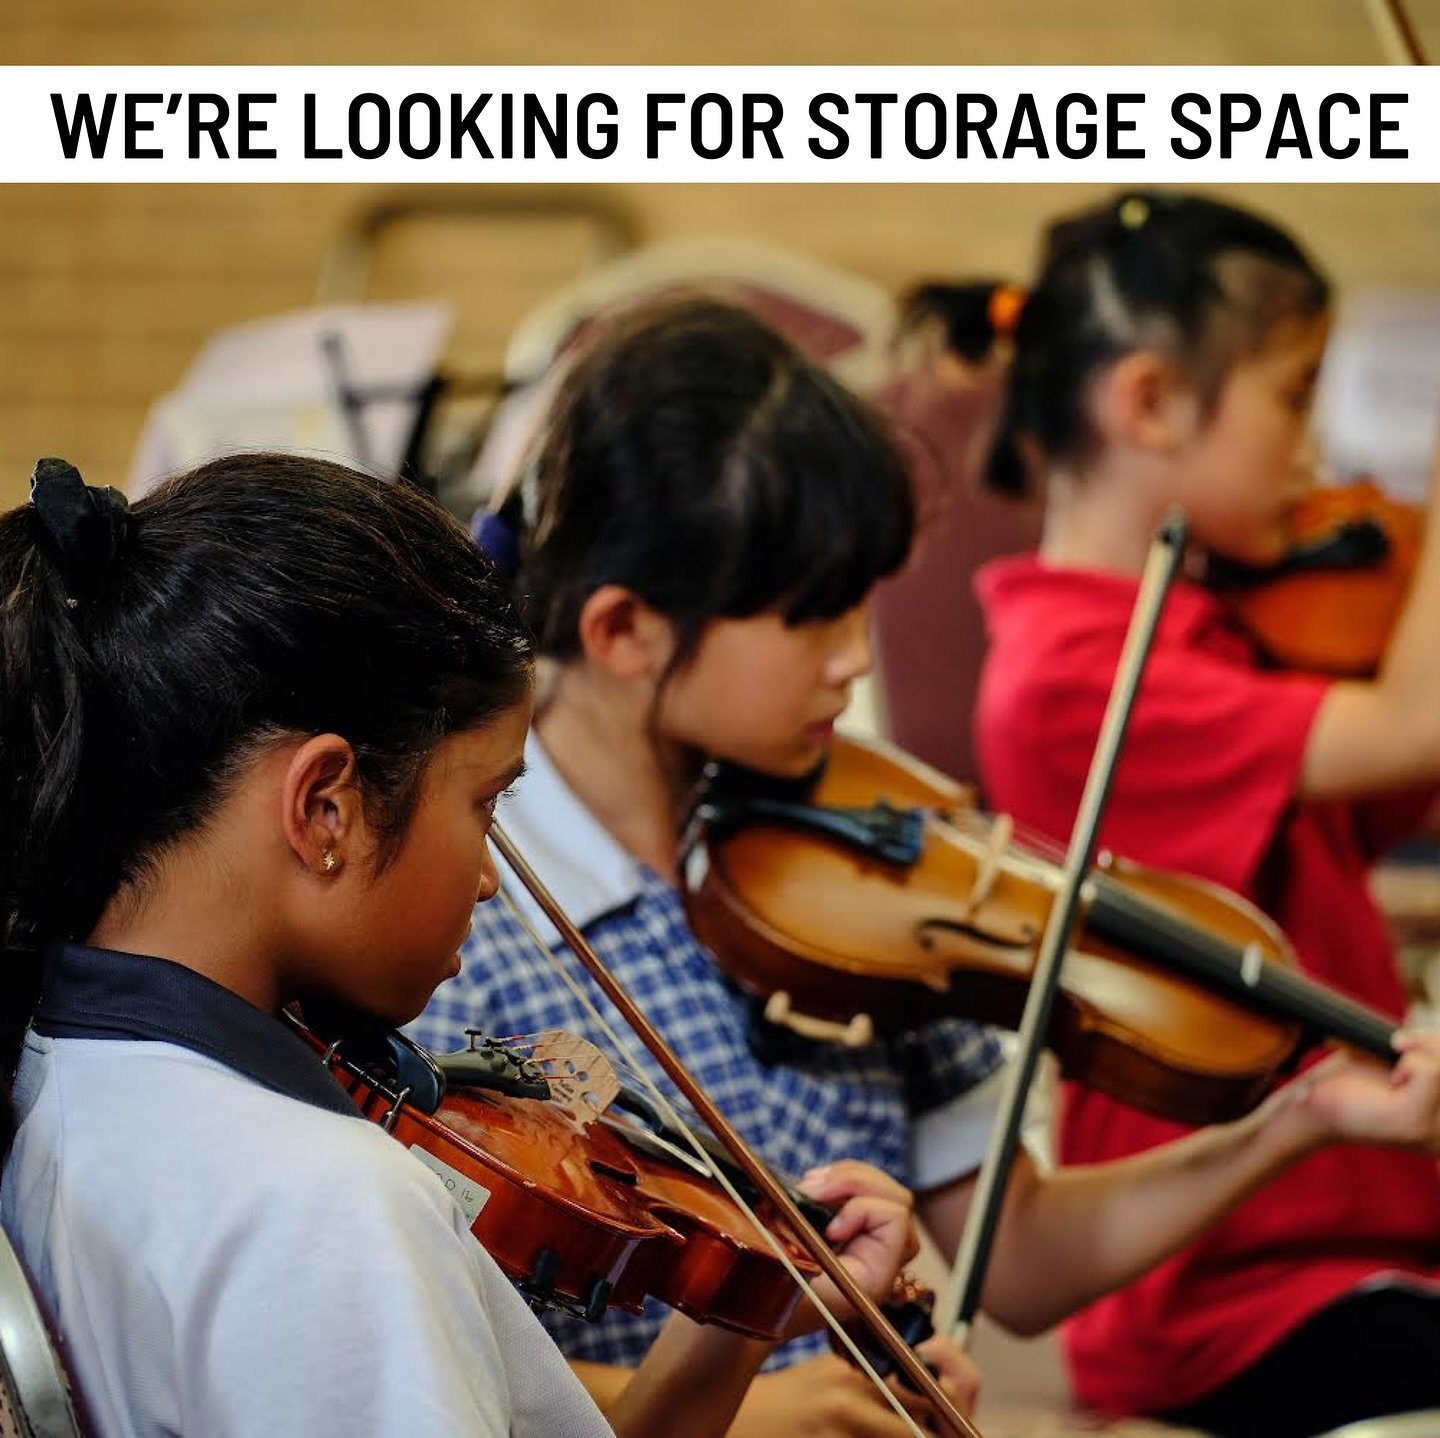 Do you have a spare bedroom, half a spare bedroom, an empty but spacious wardrobe, some other sealed and empty space?

Would you like to help us bring music to kids via the Pizzicato Effect?

We&rsquo;re looking for a space to store stringed instrume